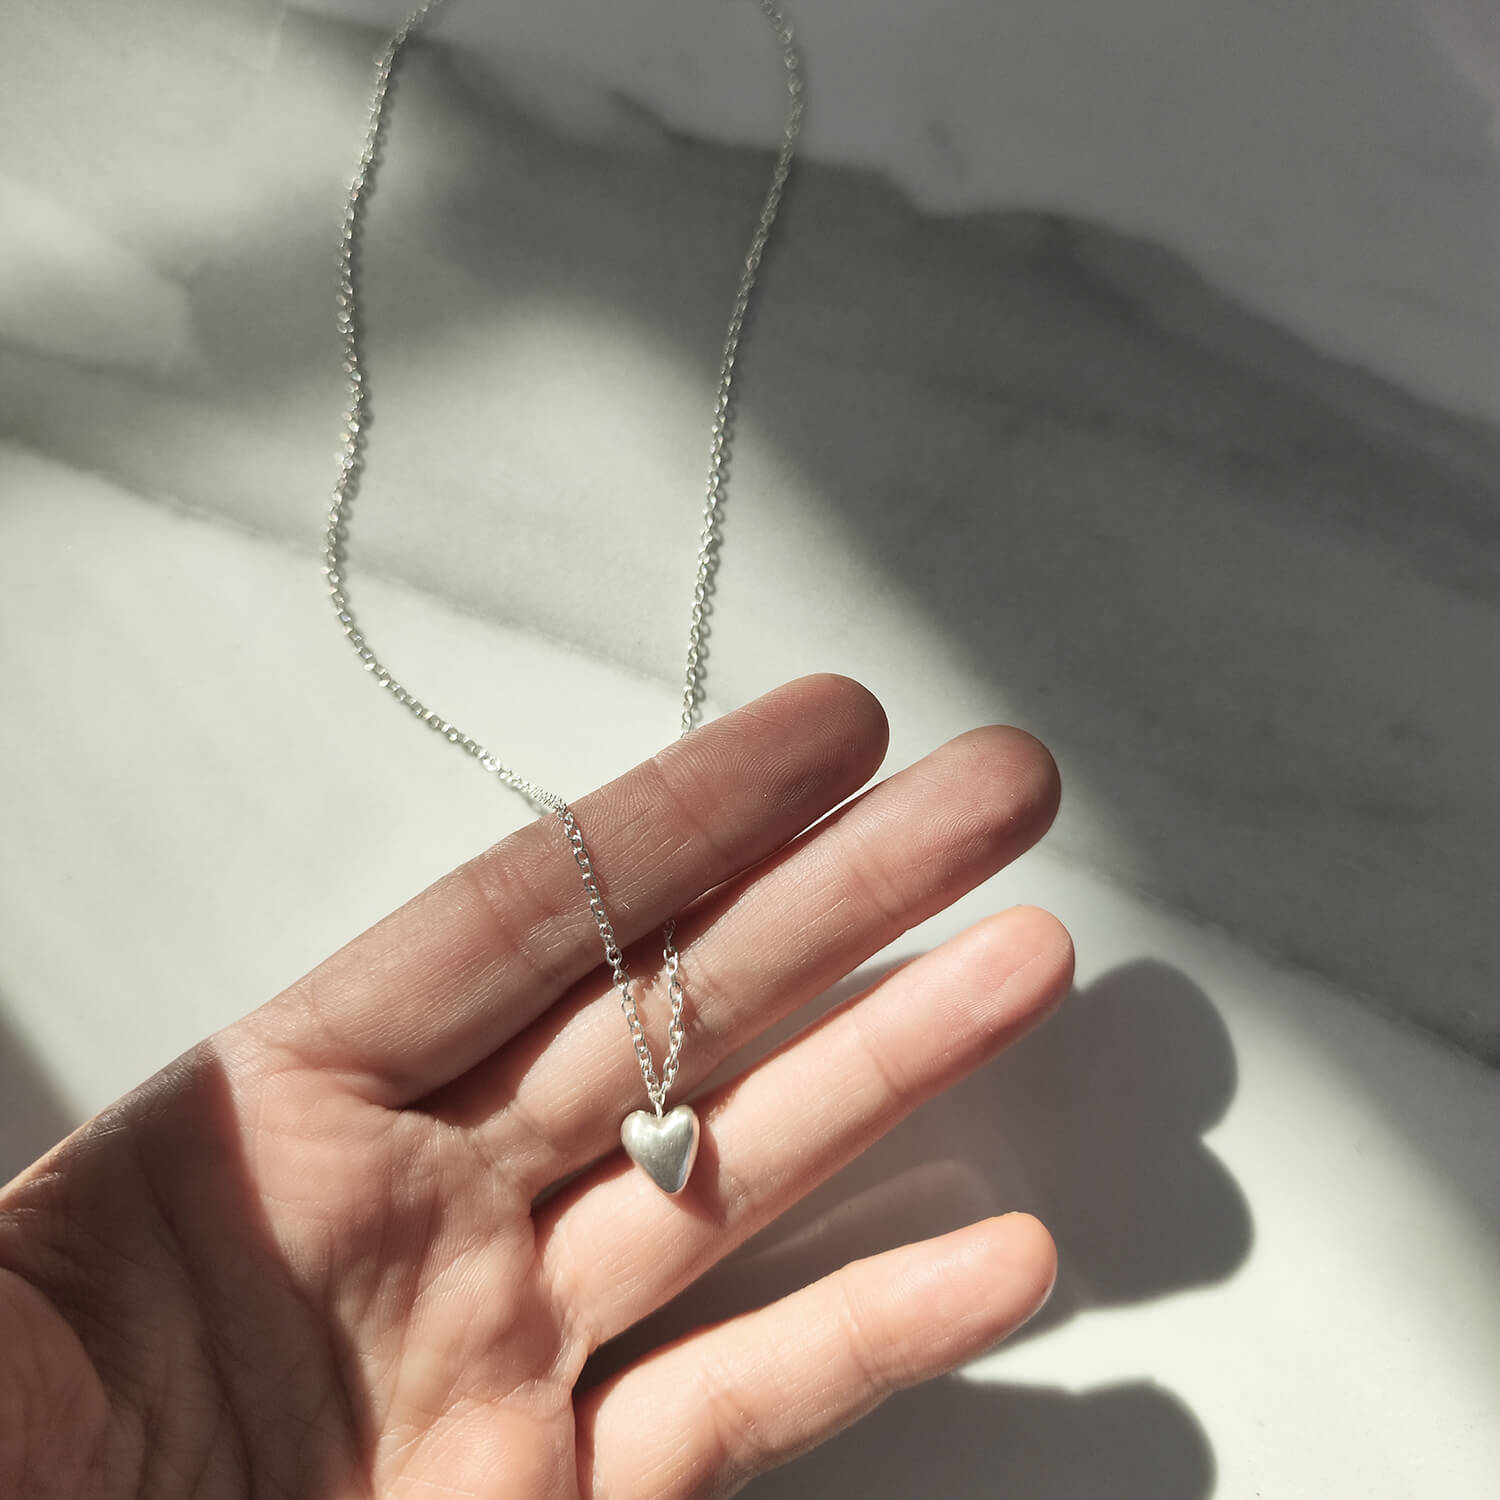 Size of the the Full heart necklace